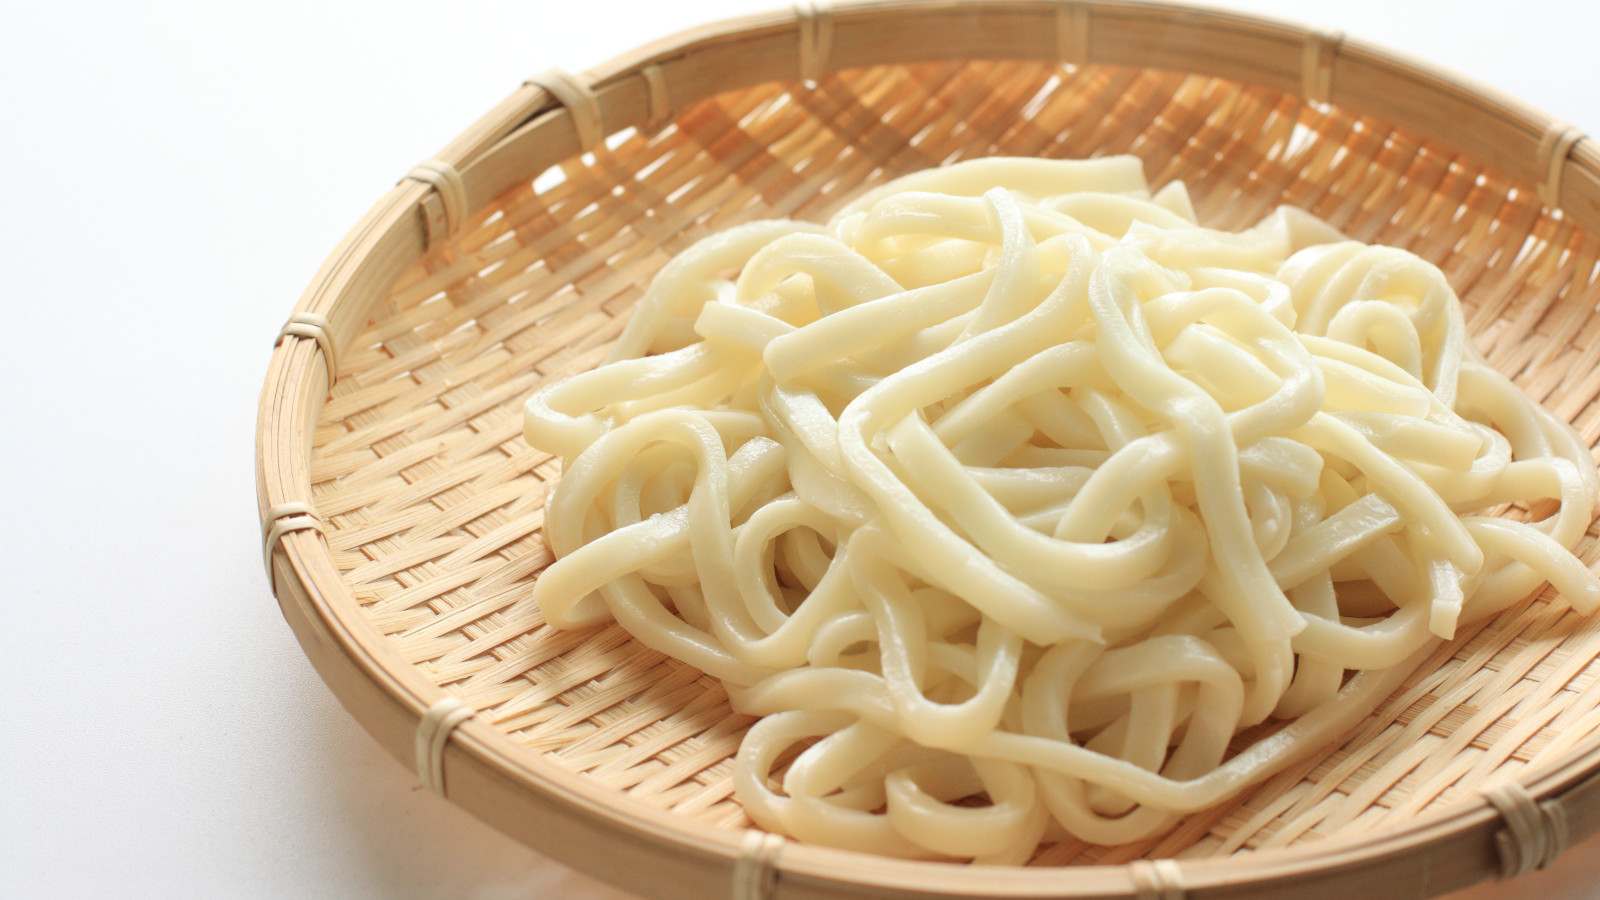 Thick and delicious Udon noodles form Japan